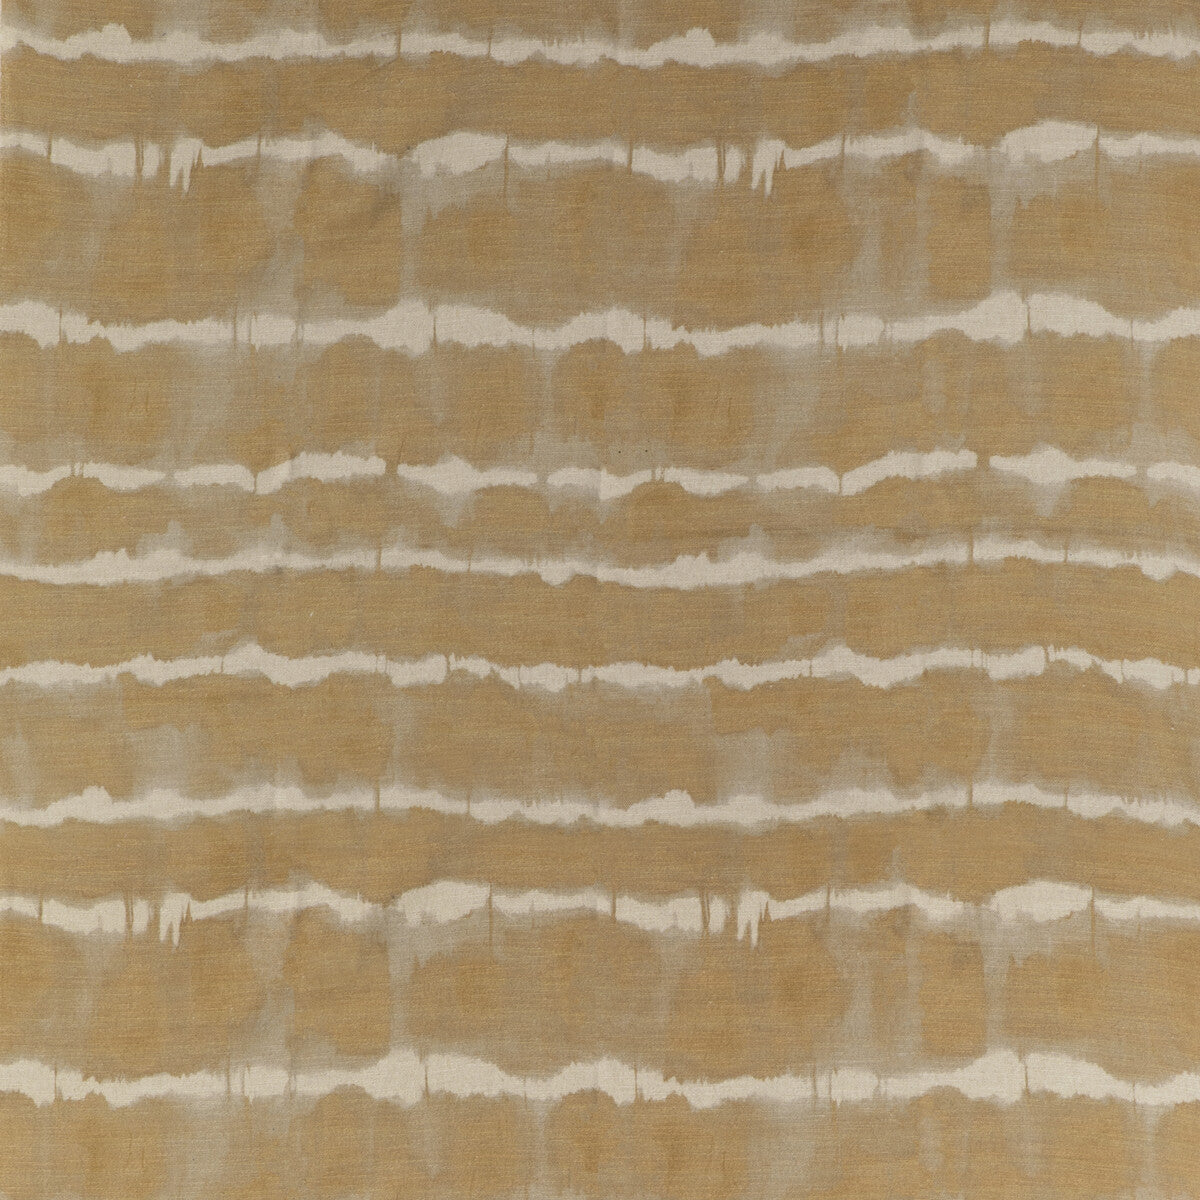 Baturi fabric in gold color - pattern BATURI.4.0 - by Kravet Couture in the Linherr Hollingsworth Boheme II collection